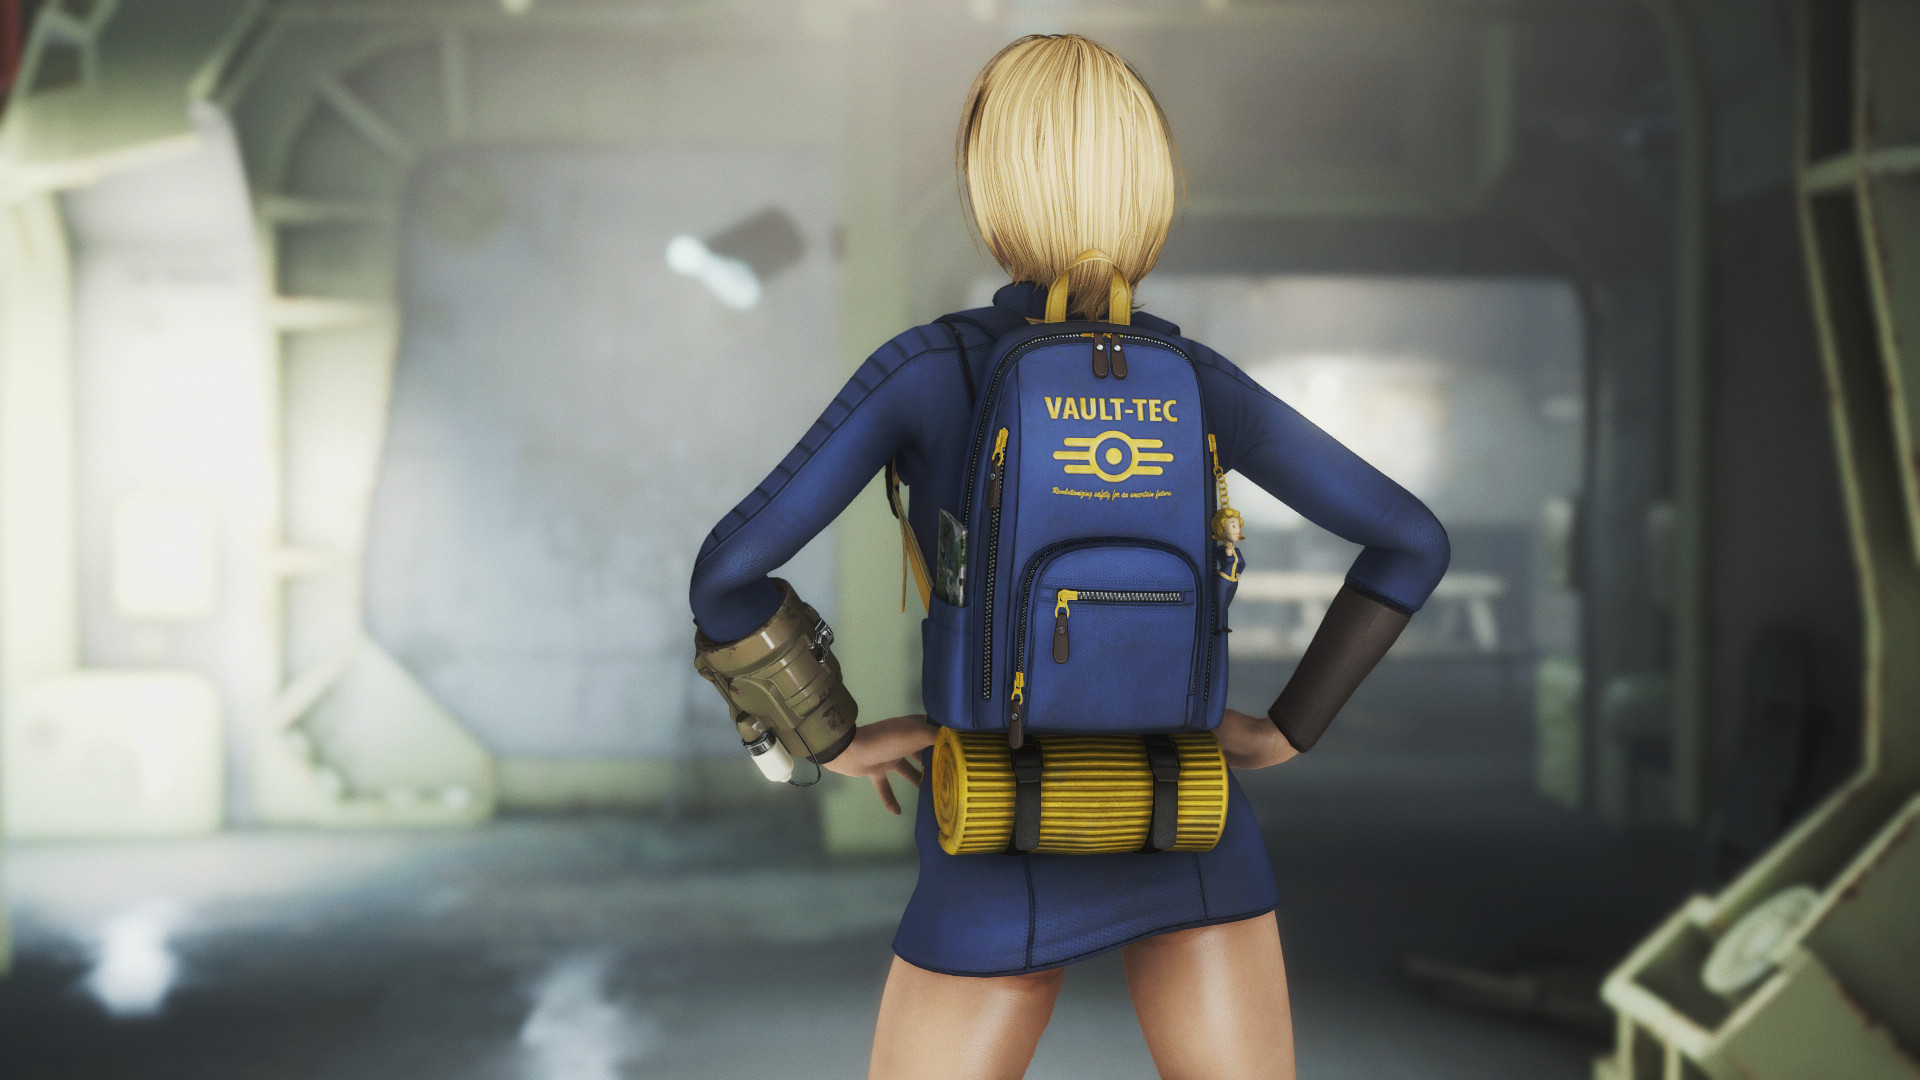 Fallout 4 vault 111 jumpsuit separate outfits studio - polelightning